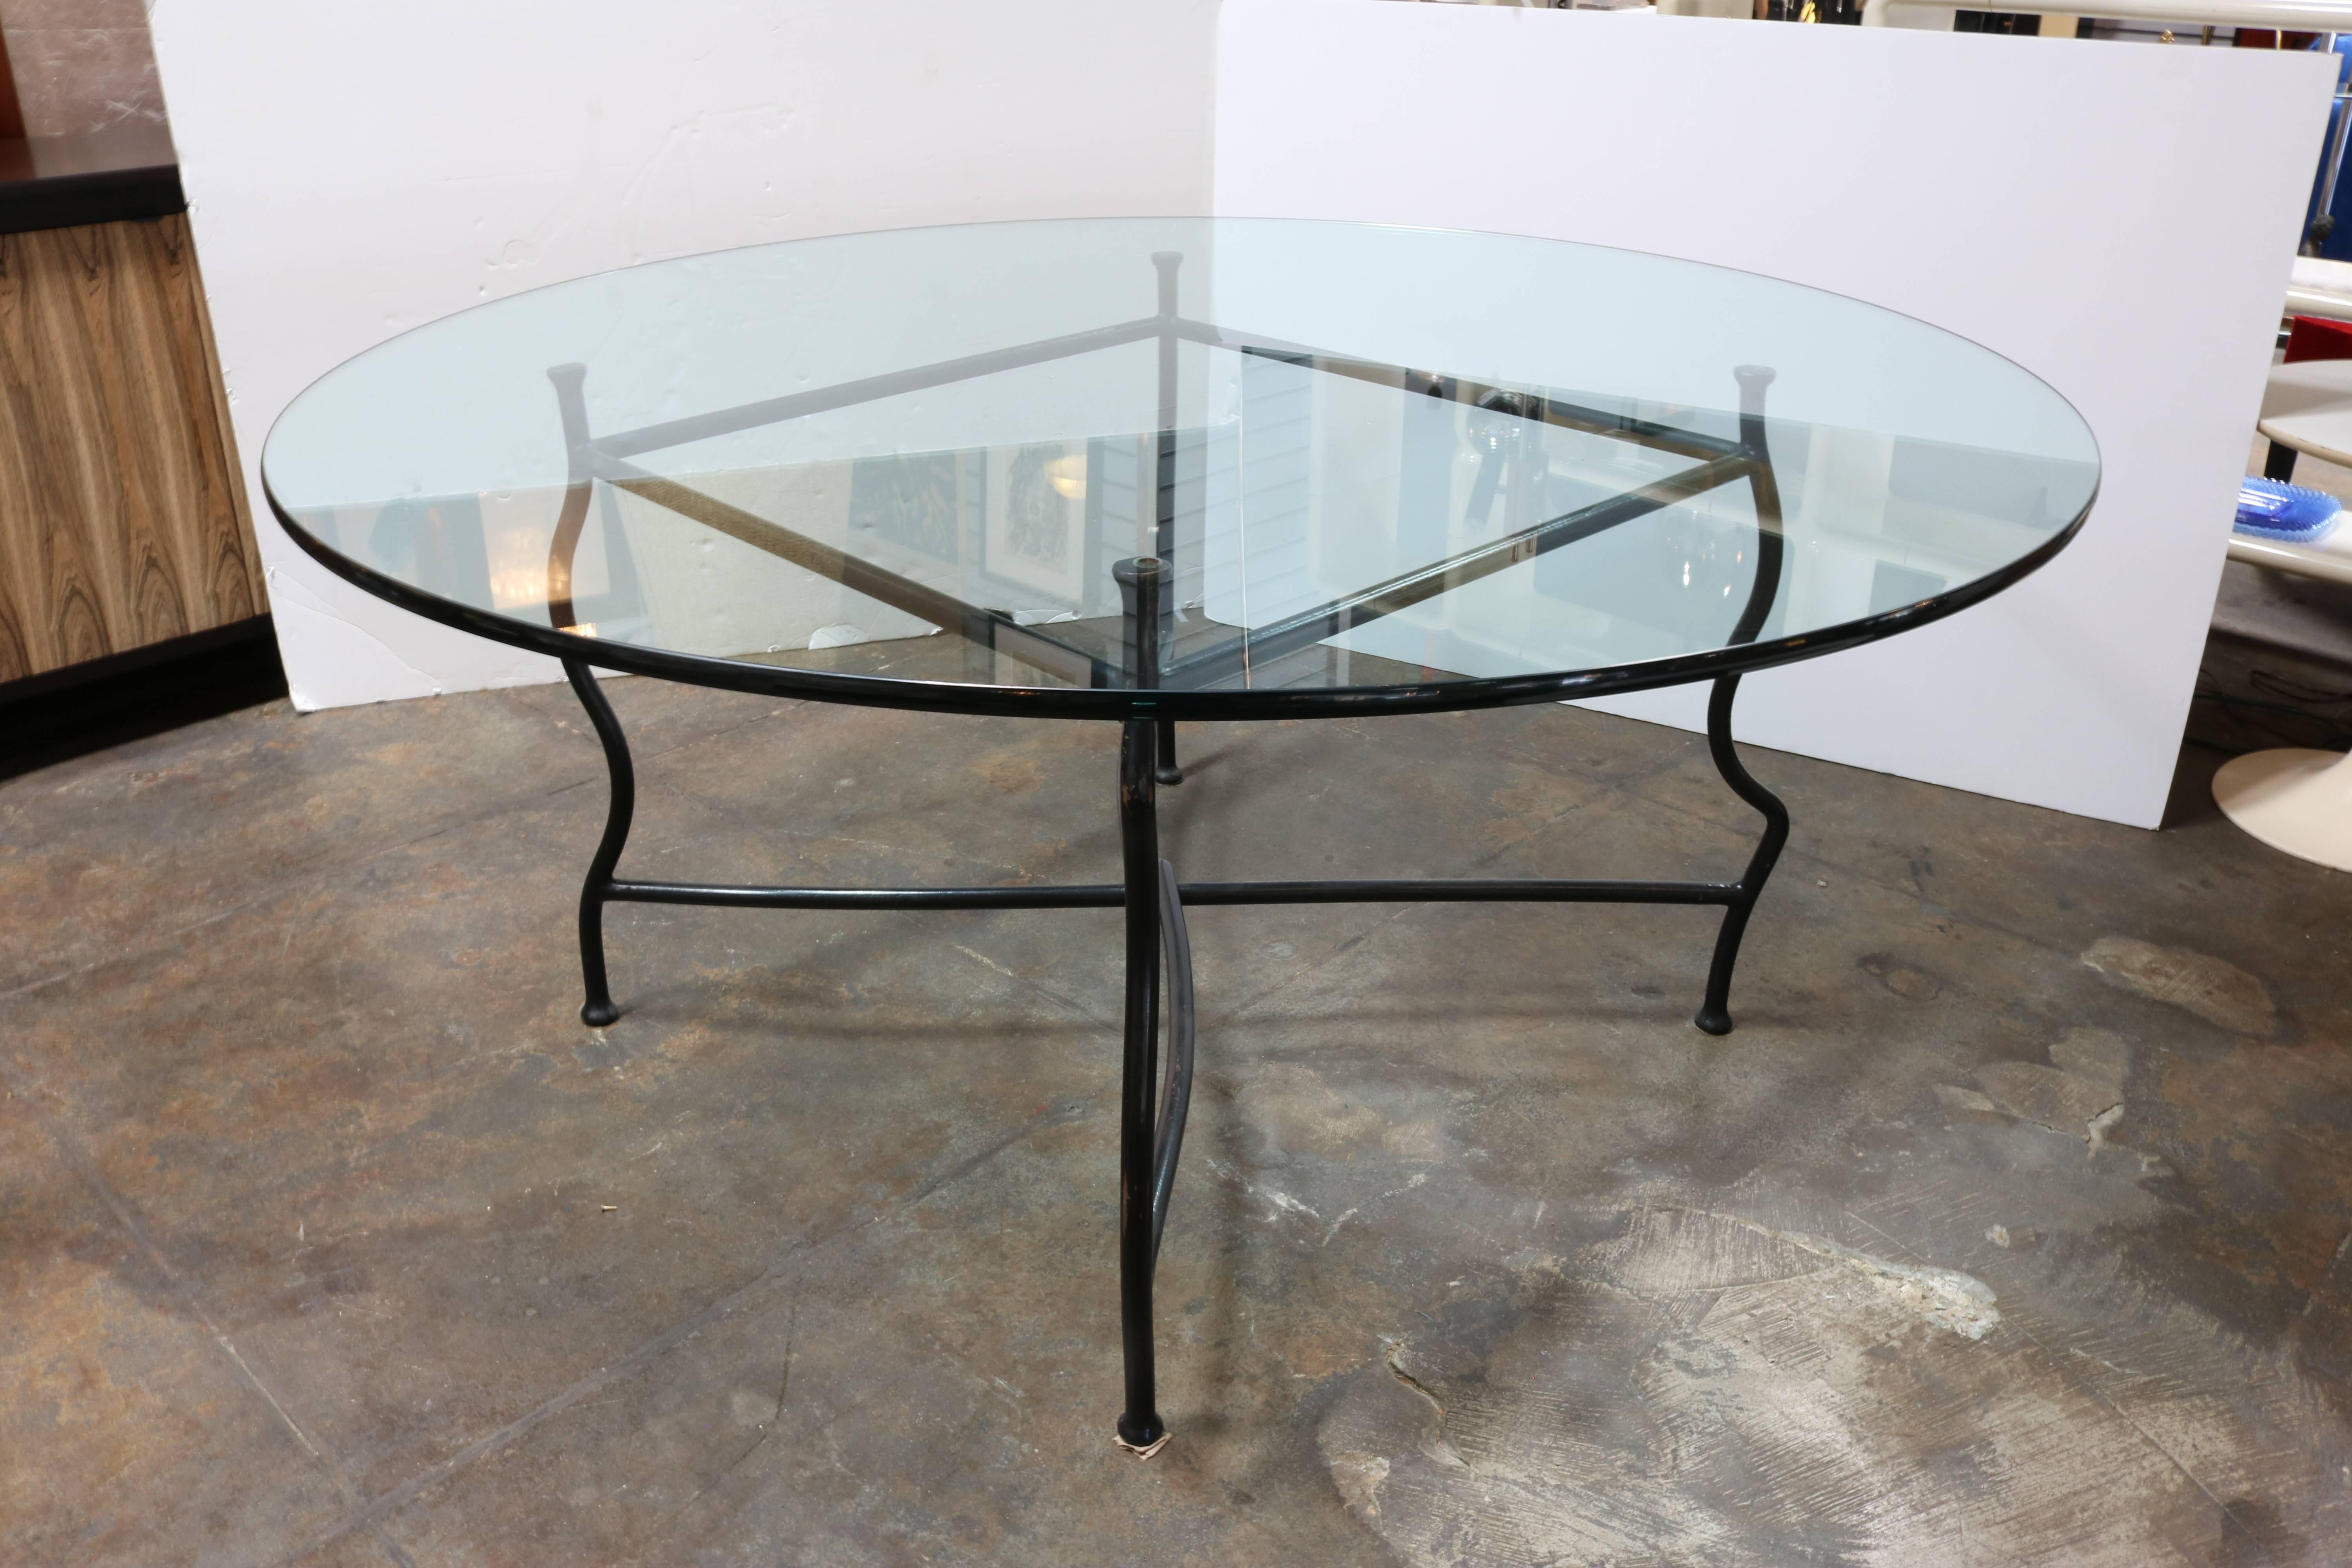 The frame of this unusual dining table was crafted in steel with a gun finish.
Undulating legs alternate in a convex and concave formation.
However, despite this hint of whimsy, the table is incredibly sturdy and solid.
The legs are united by a